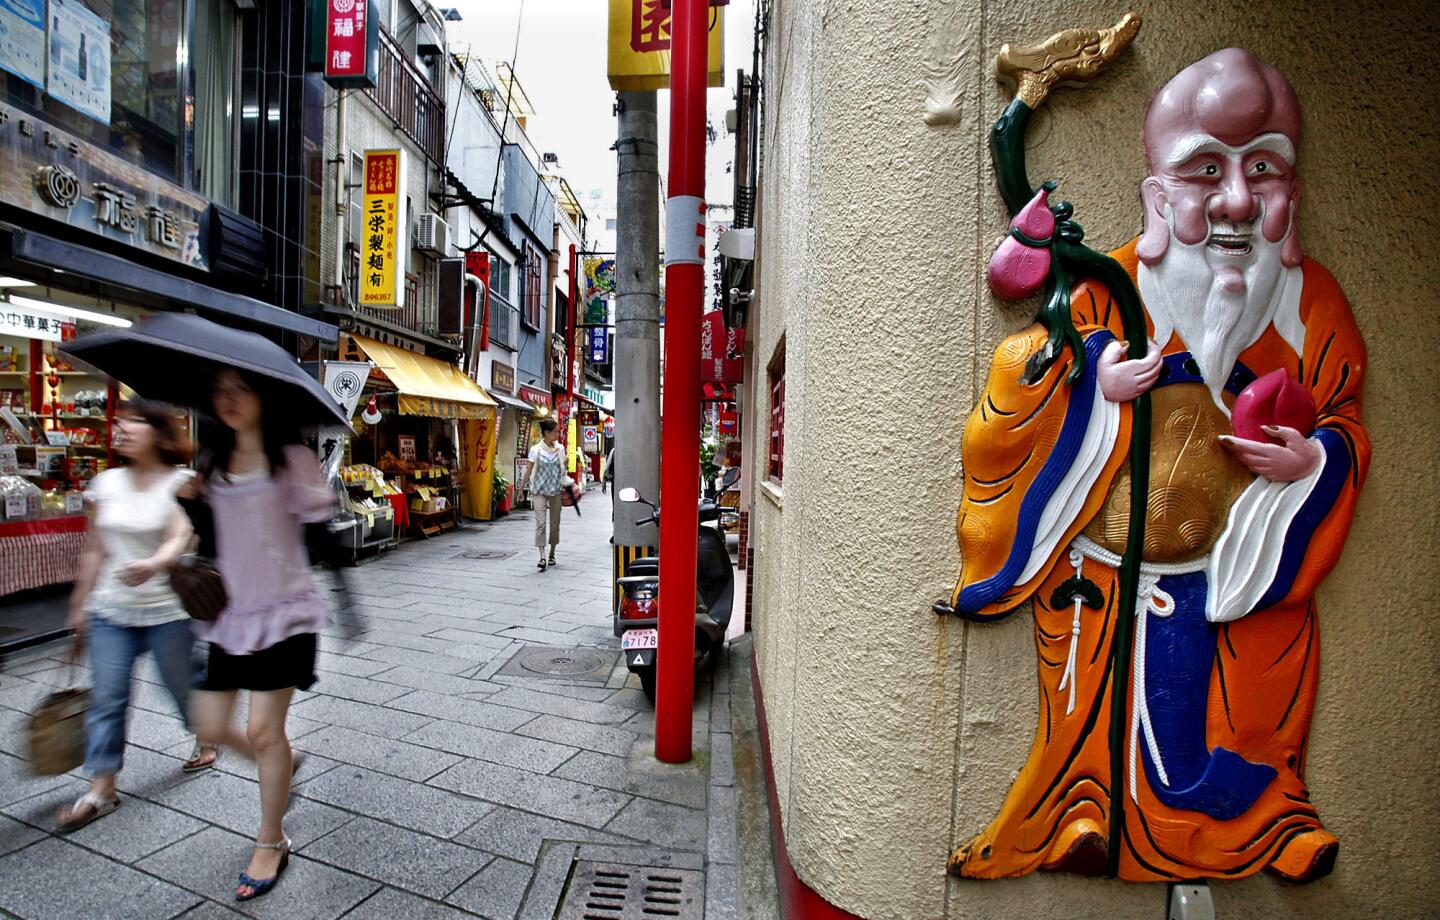 People walk through an alley in Nagasaki's Chinatown, one of the largest Chinatowns in Japan.